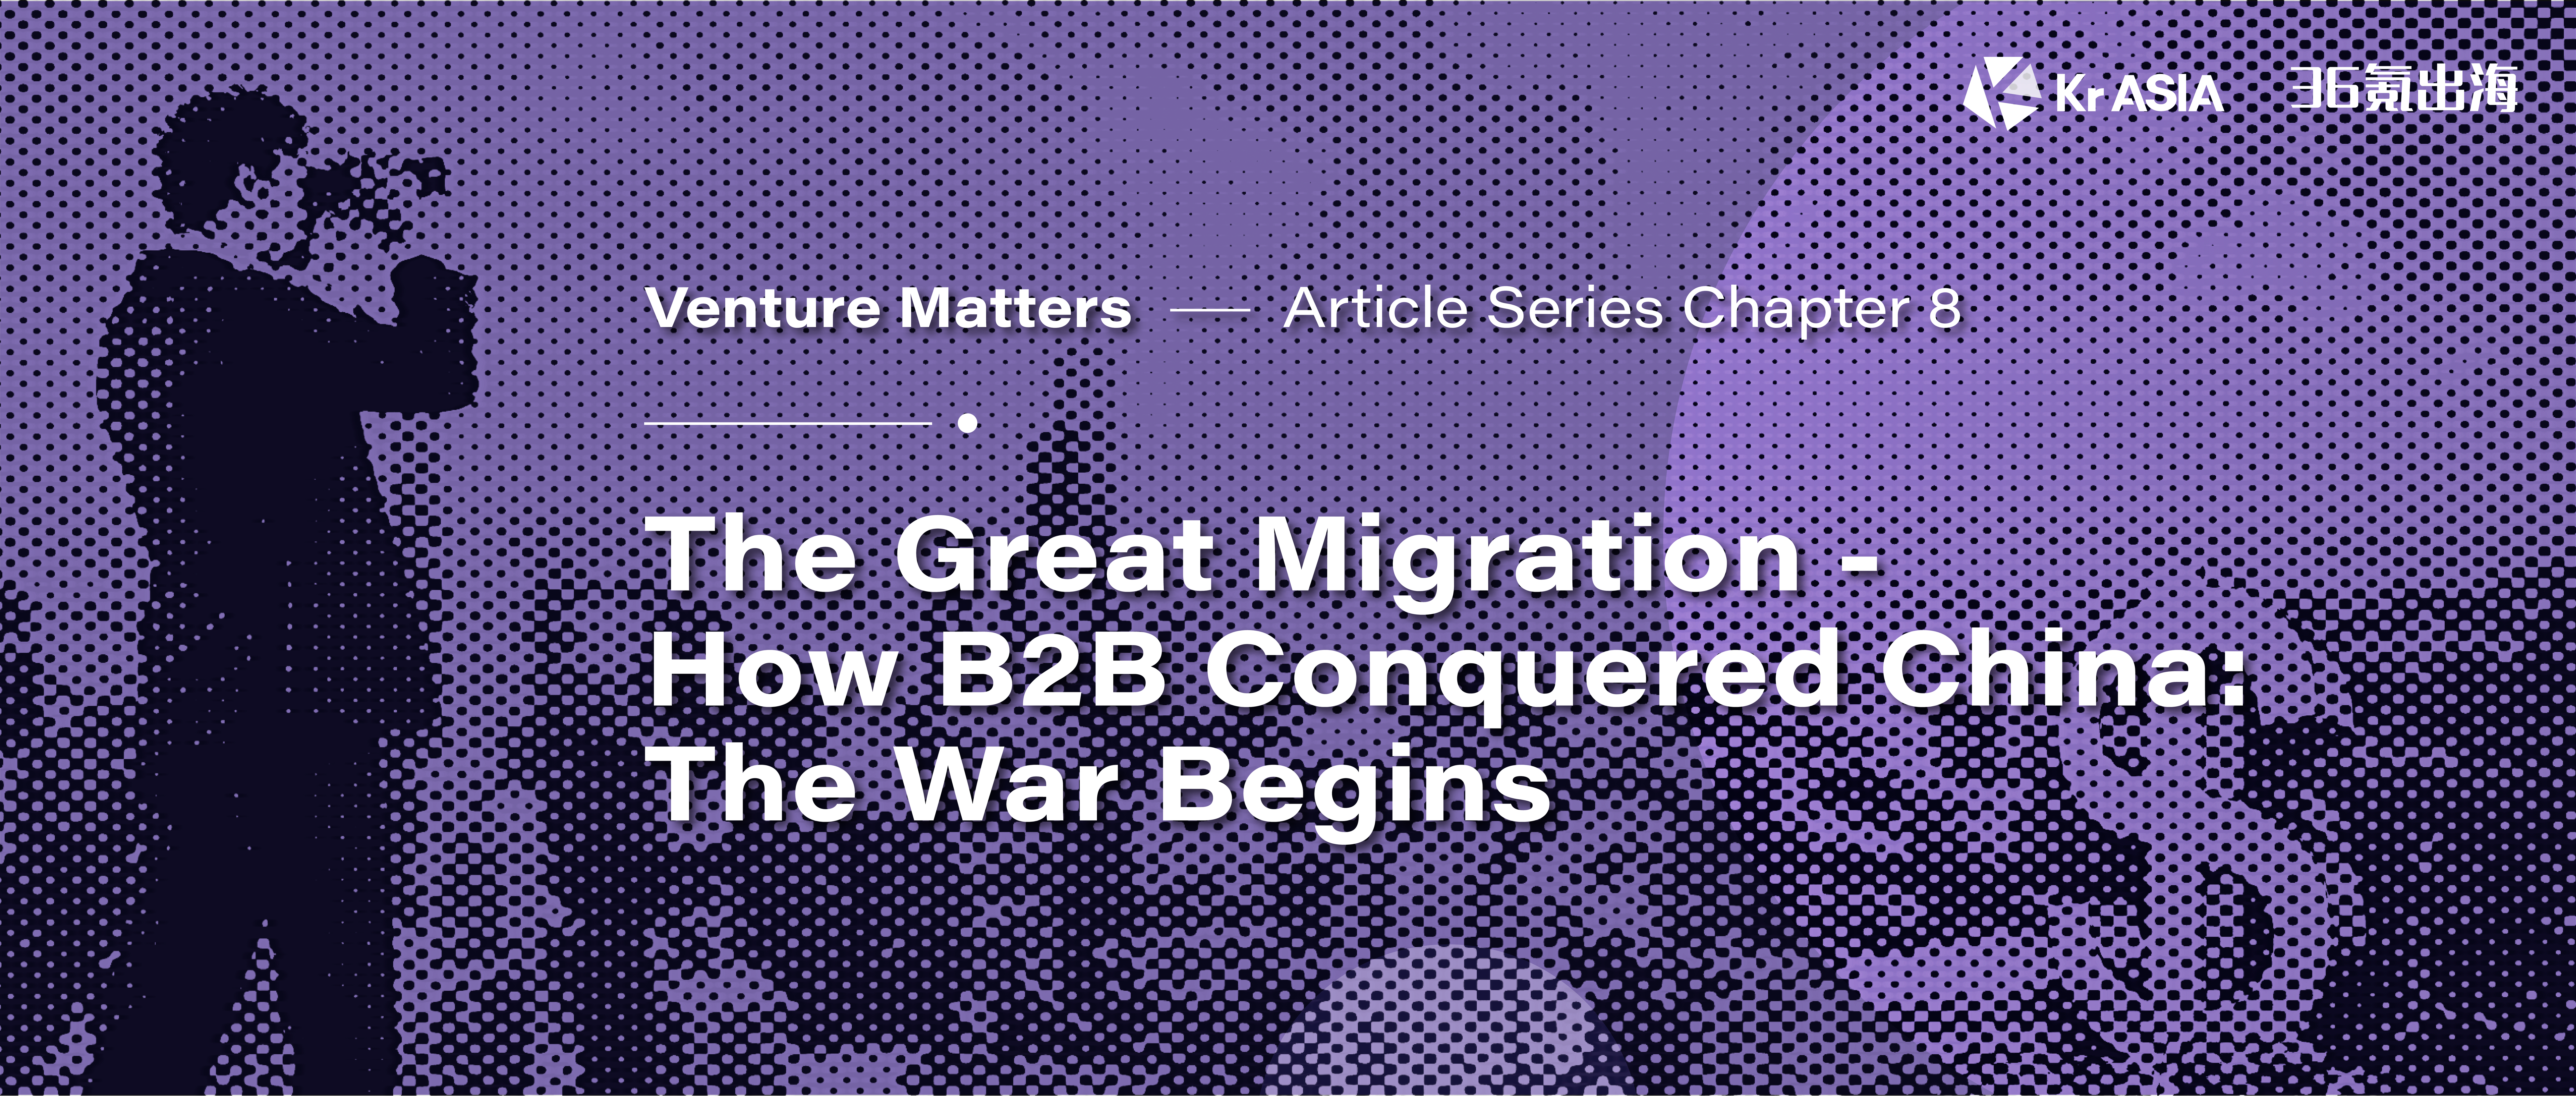 Venture Matters | The Great Migration – How B2B conquered China: The War Begins (Part 2 of 2)